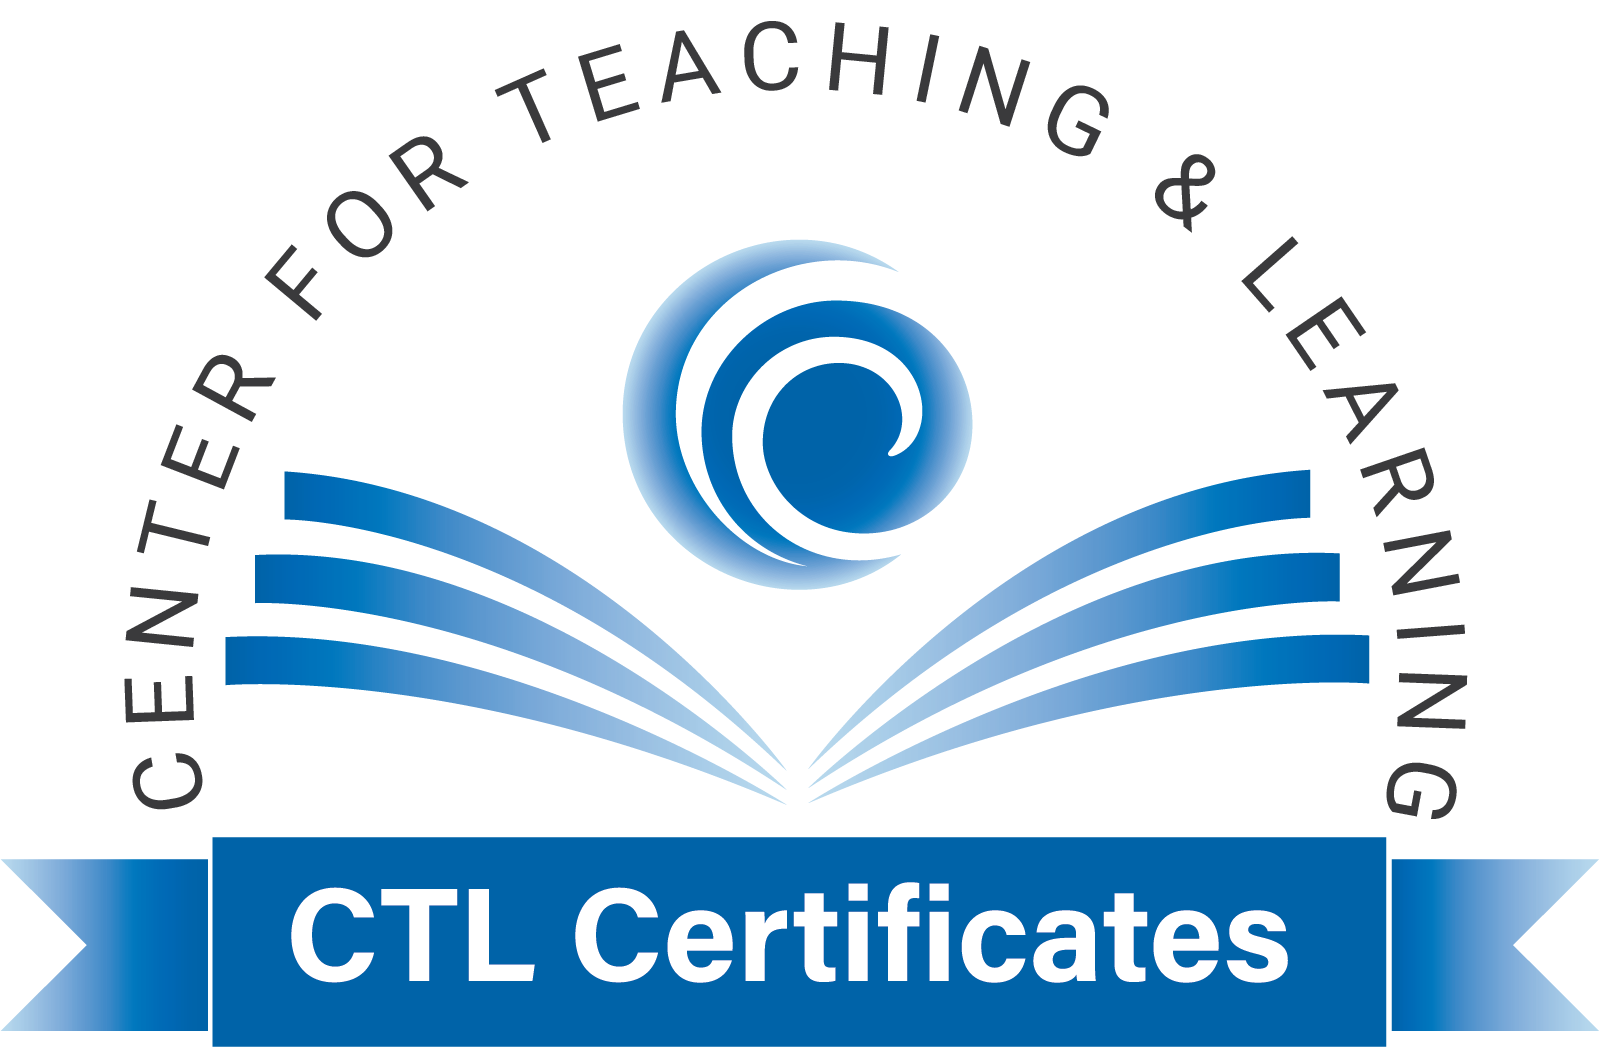 CTL Certificates Moraine Valley Center for Teaching & Learning